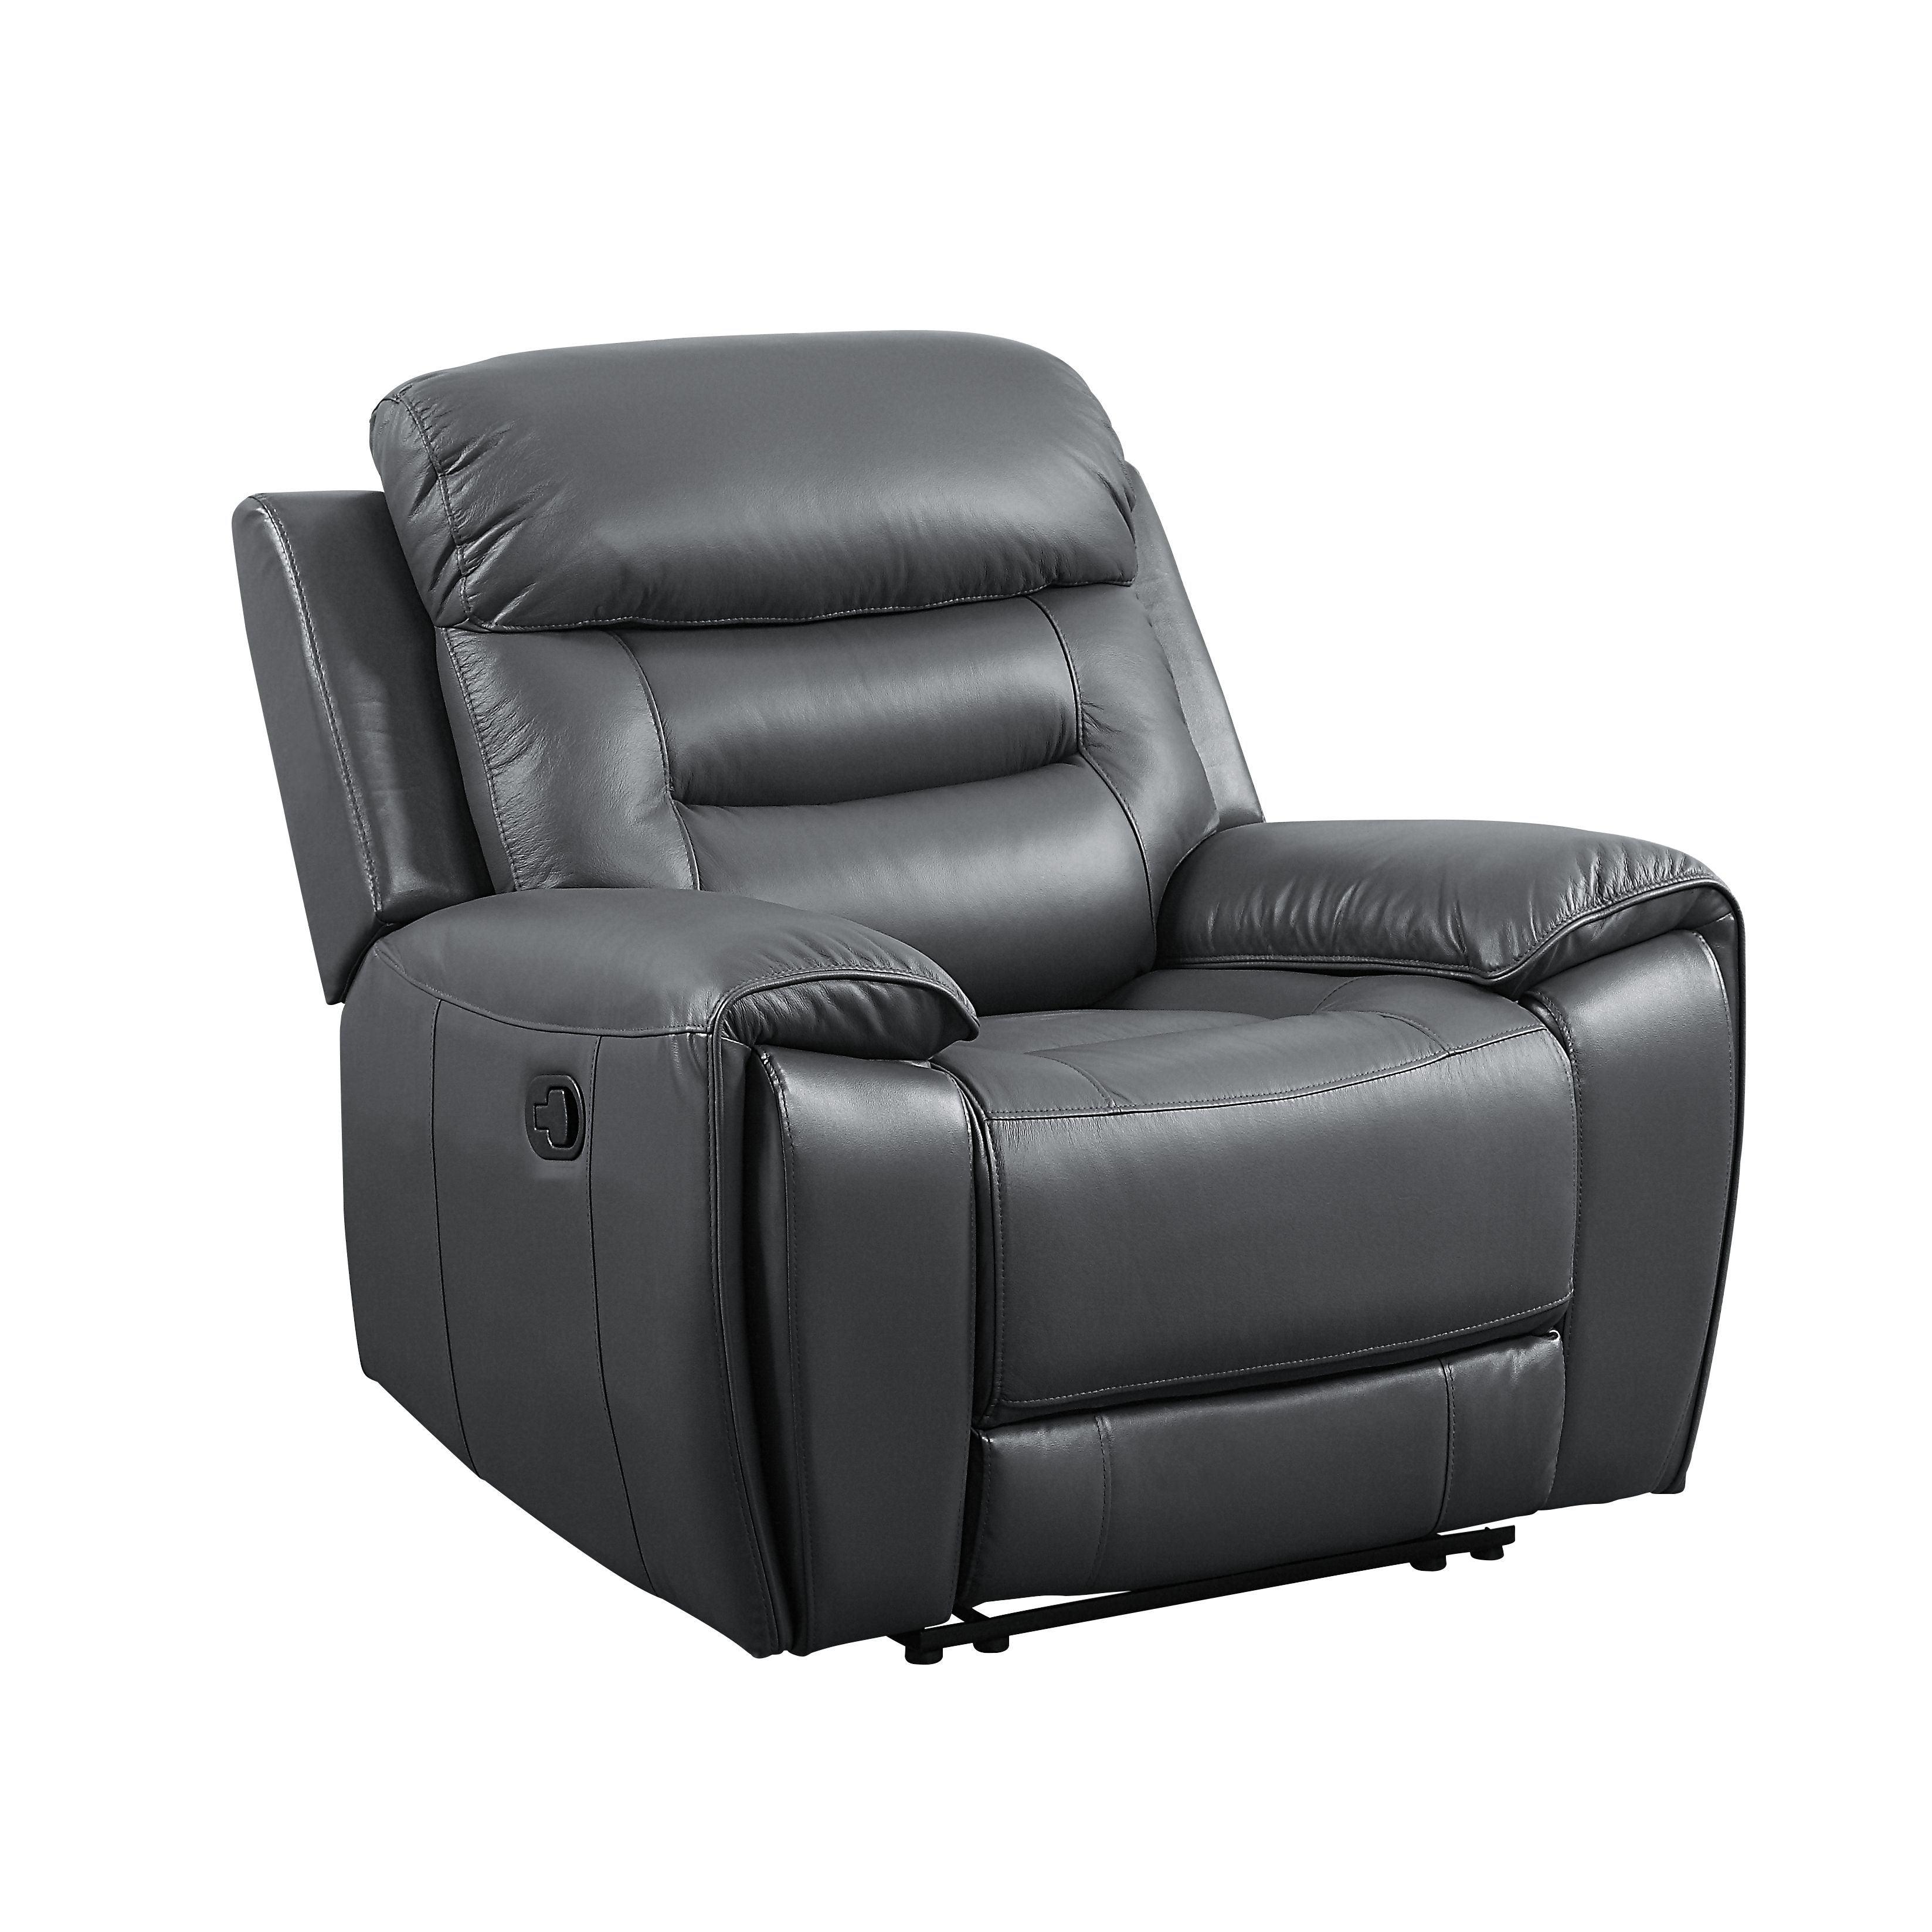 ACME - Lamruil - Recliner - Gray Top Grain Leather - 5th Avenue Furniture